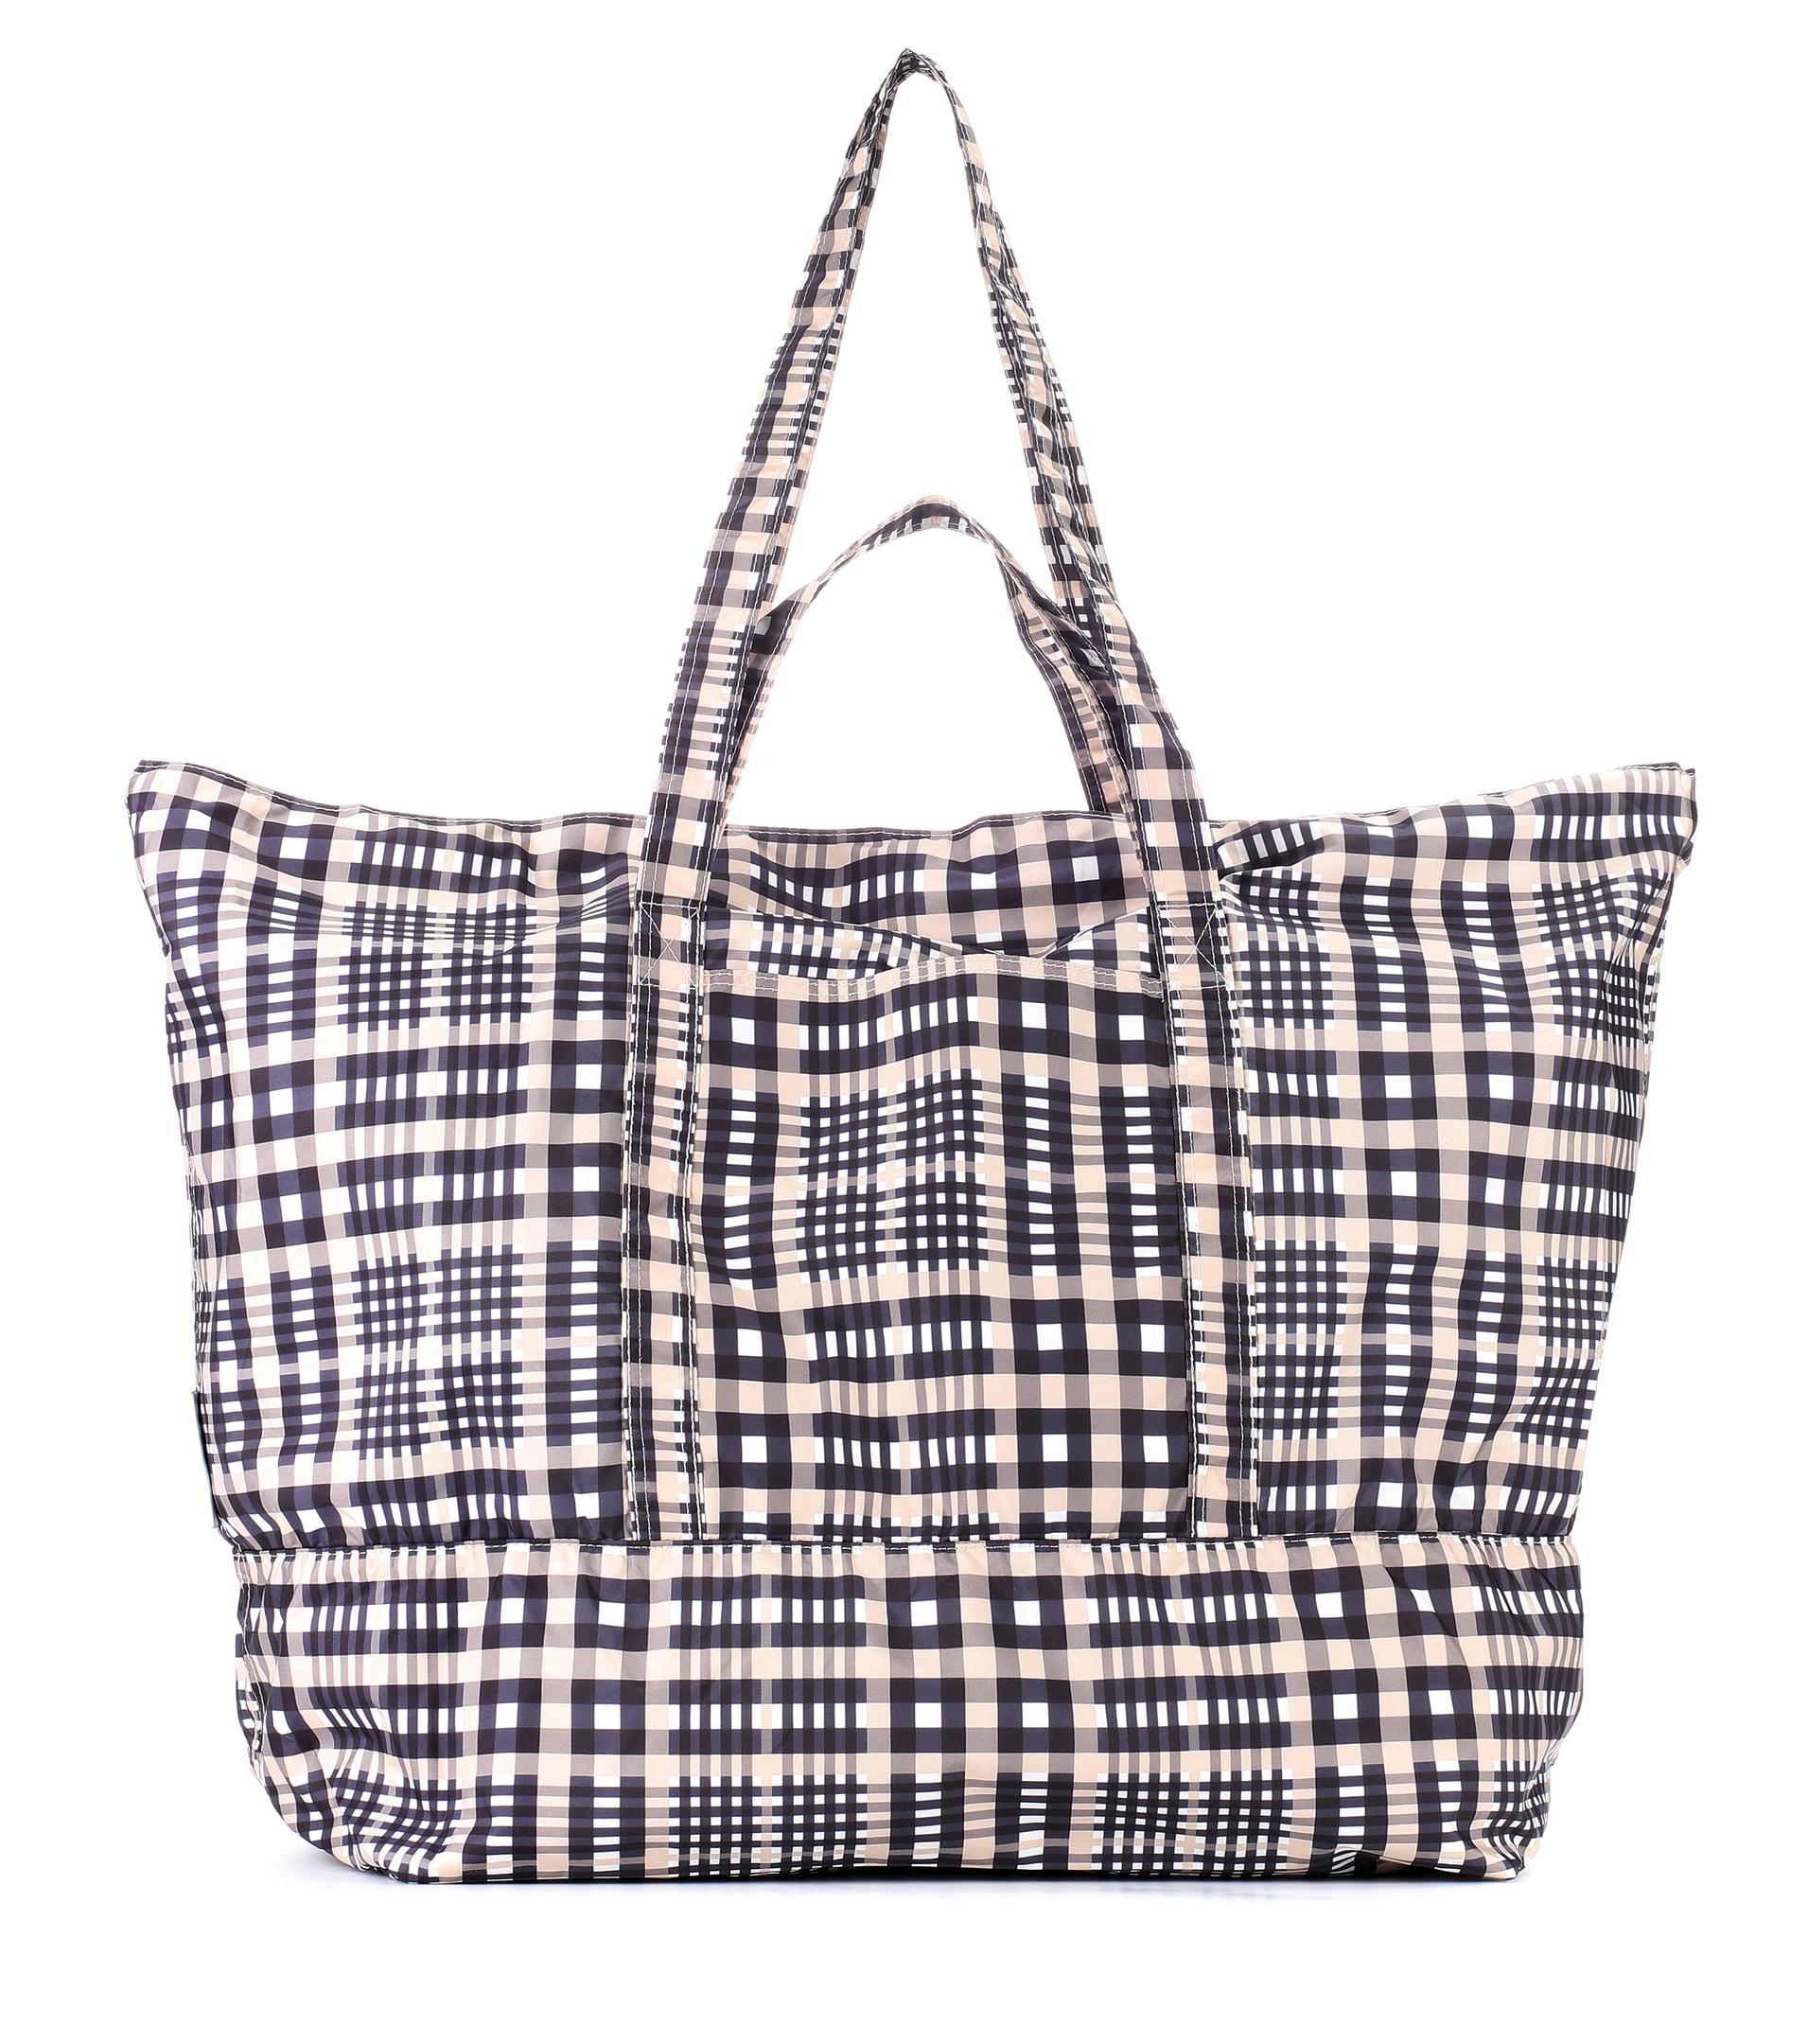 Ganni Fairmont Checked Tote in Red - Lyst